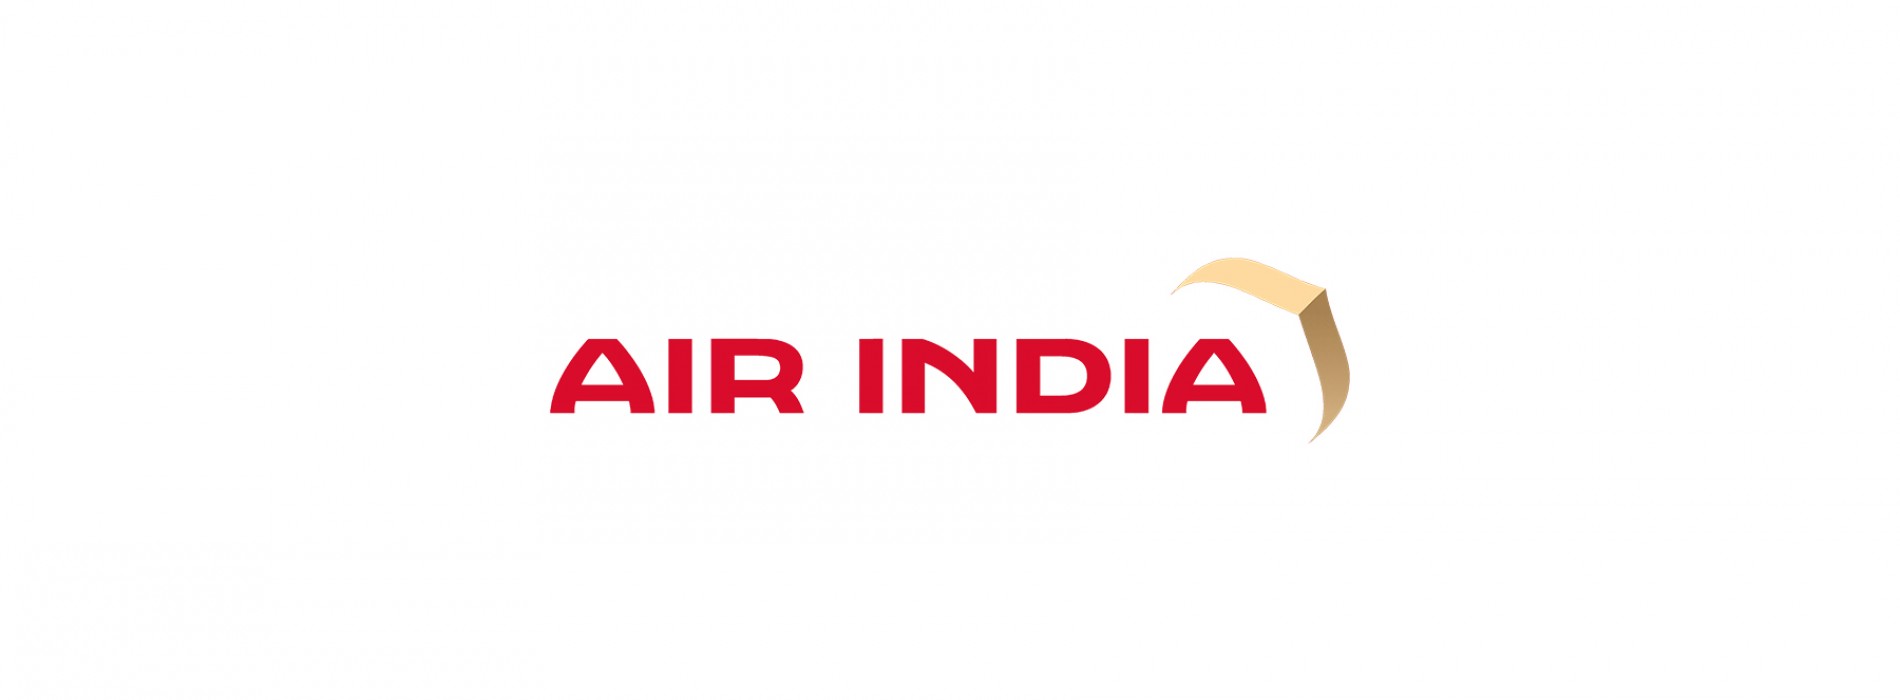 Air India to fly non-stop between Mumbai and Melbourne from 15 December